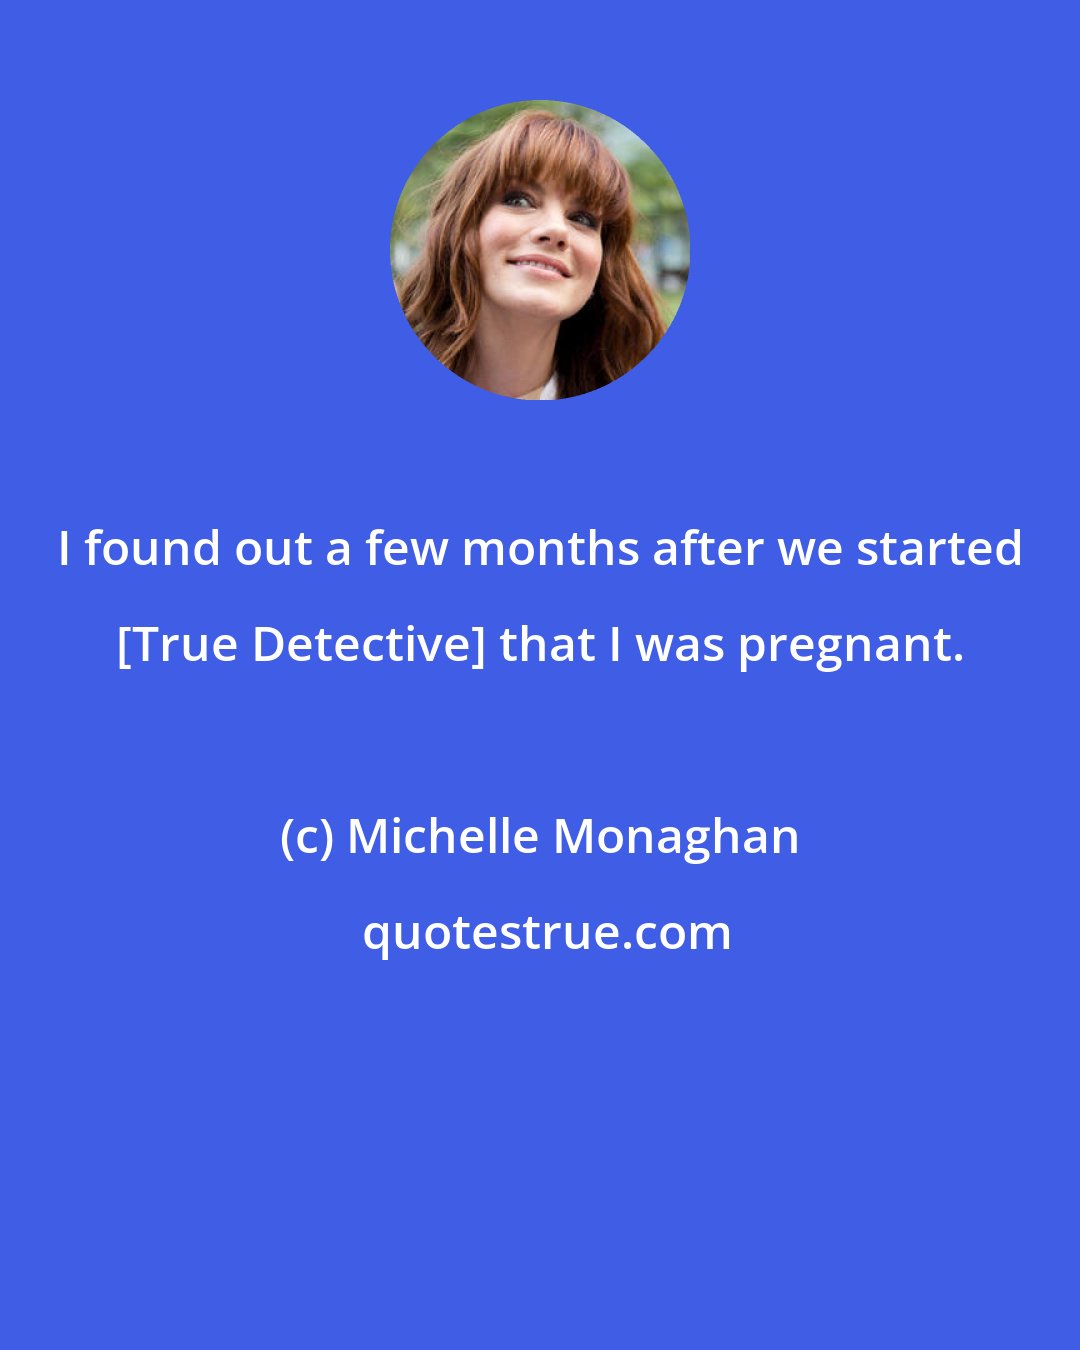 Michelle Monaghan: I found out a few months after we started [True Detective] that I was pregnant.